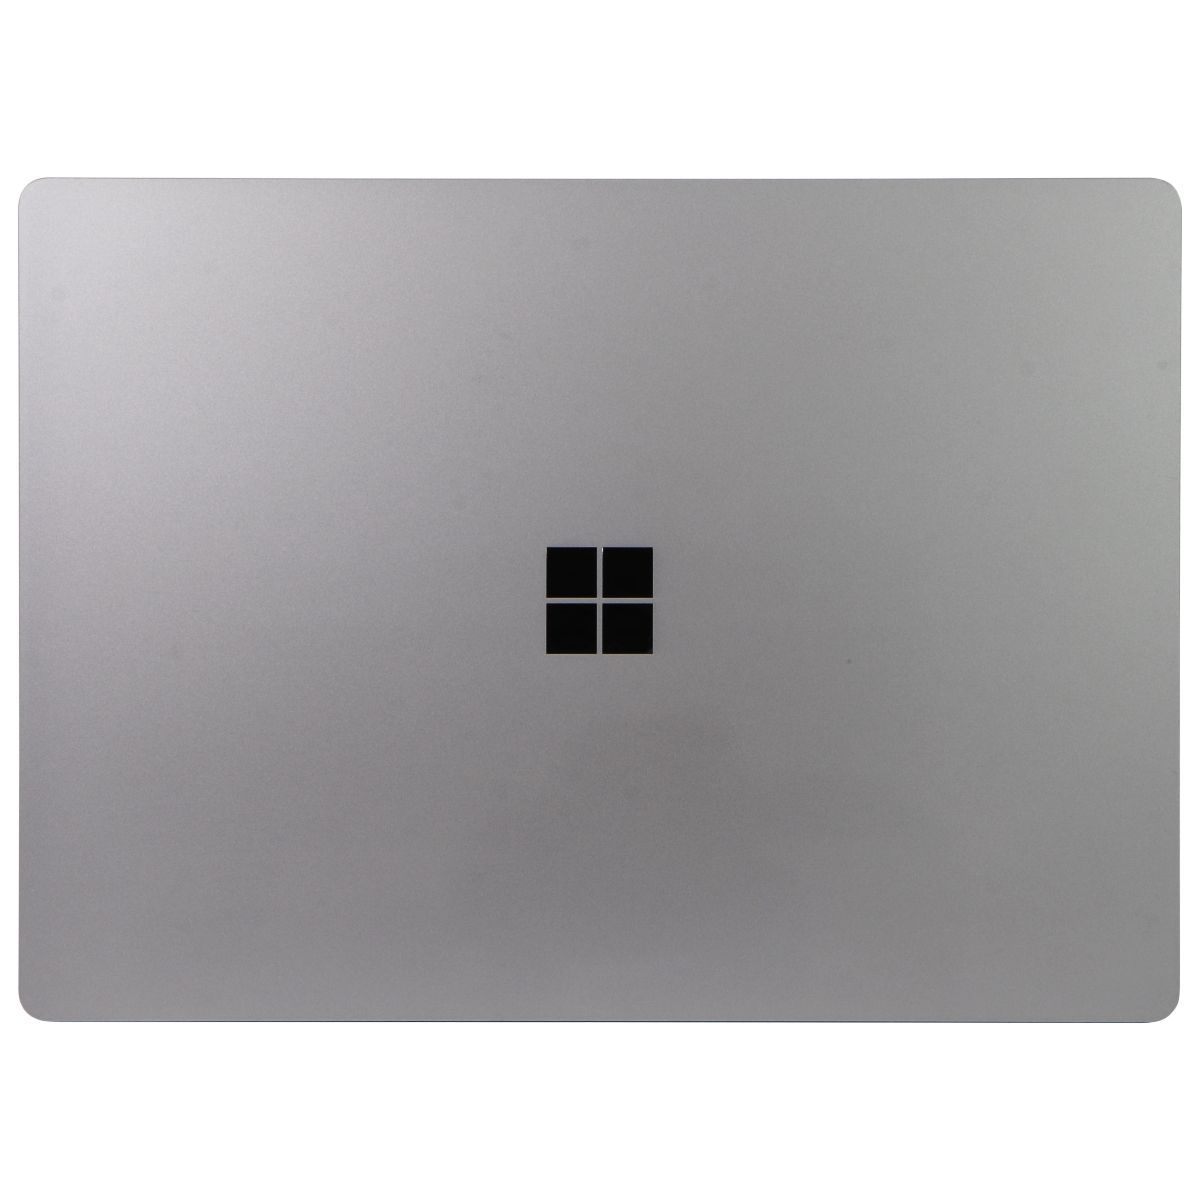 Microsoft Surface Laptop 3 (13.5-in Touch) 1867 (i5-1035/128GB SSD/8GB) Platinum